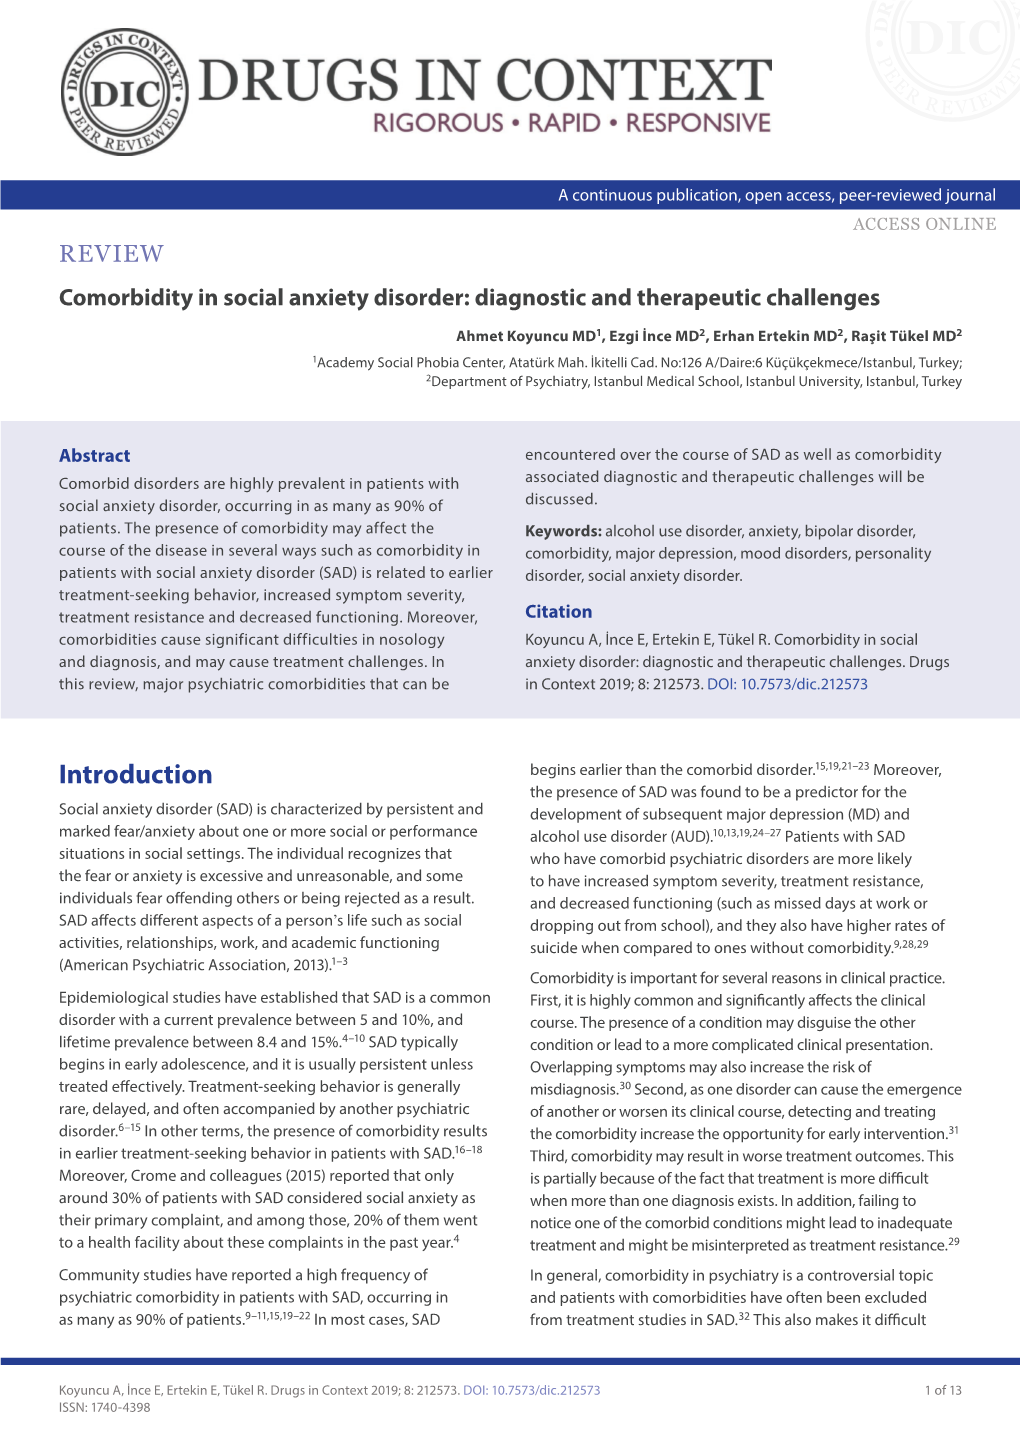 Comorbidity in Social Anxiety Disorder: Diagnostic and Therapeutic Challenges